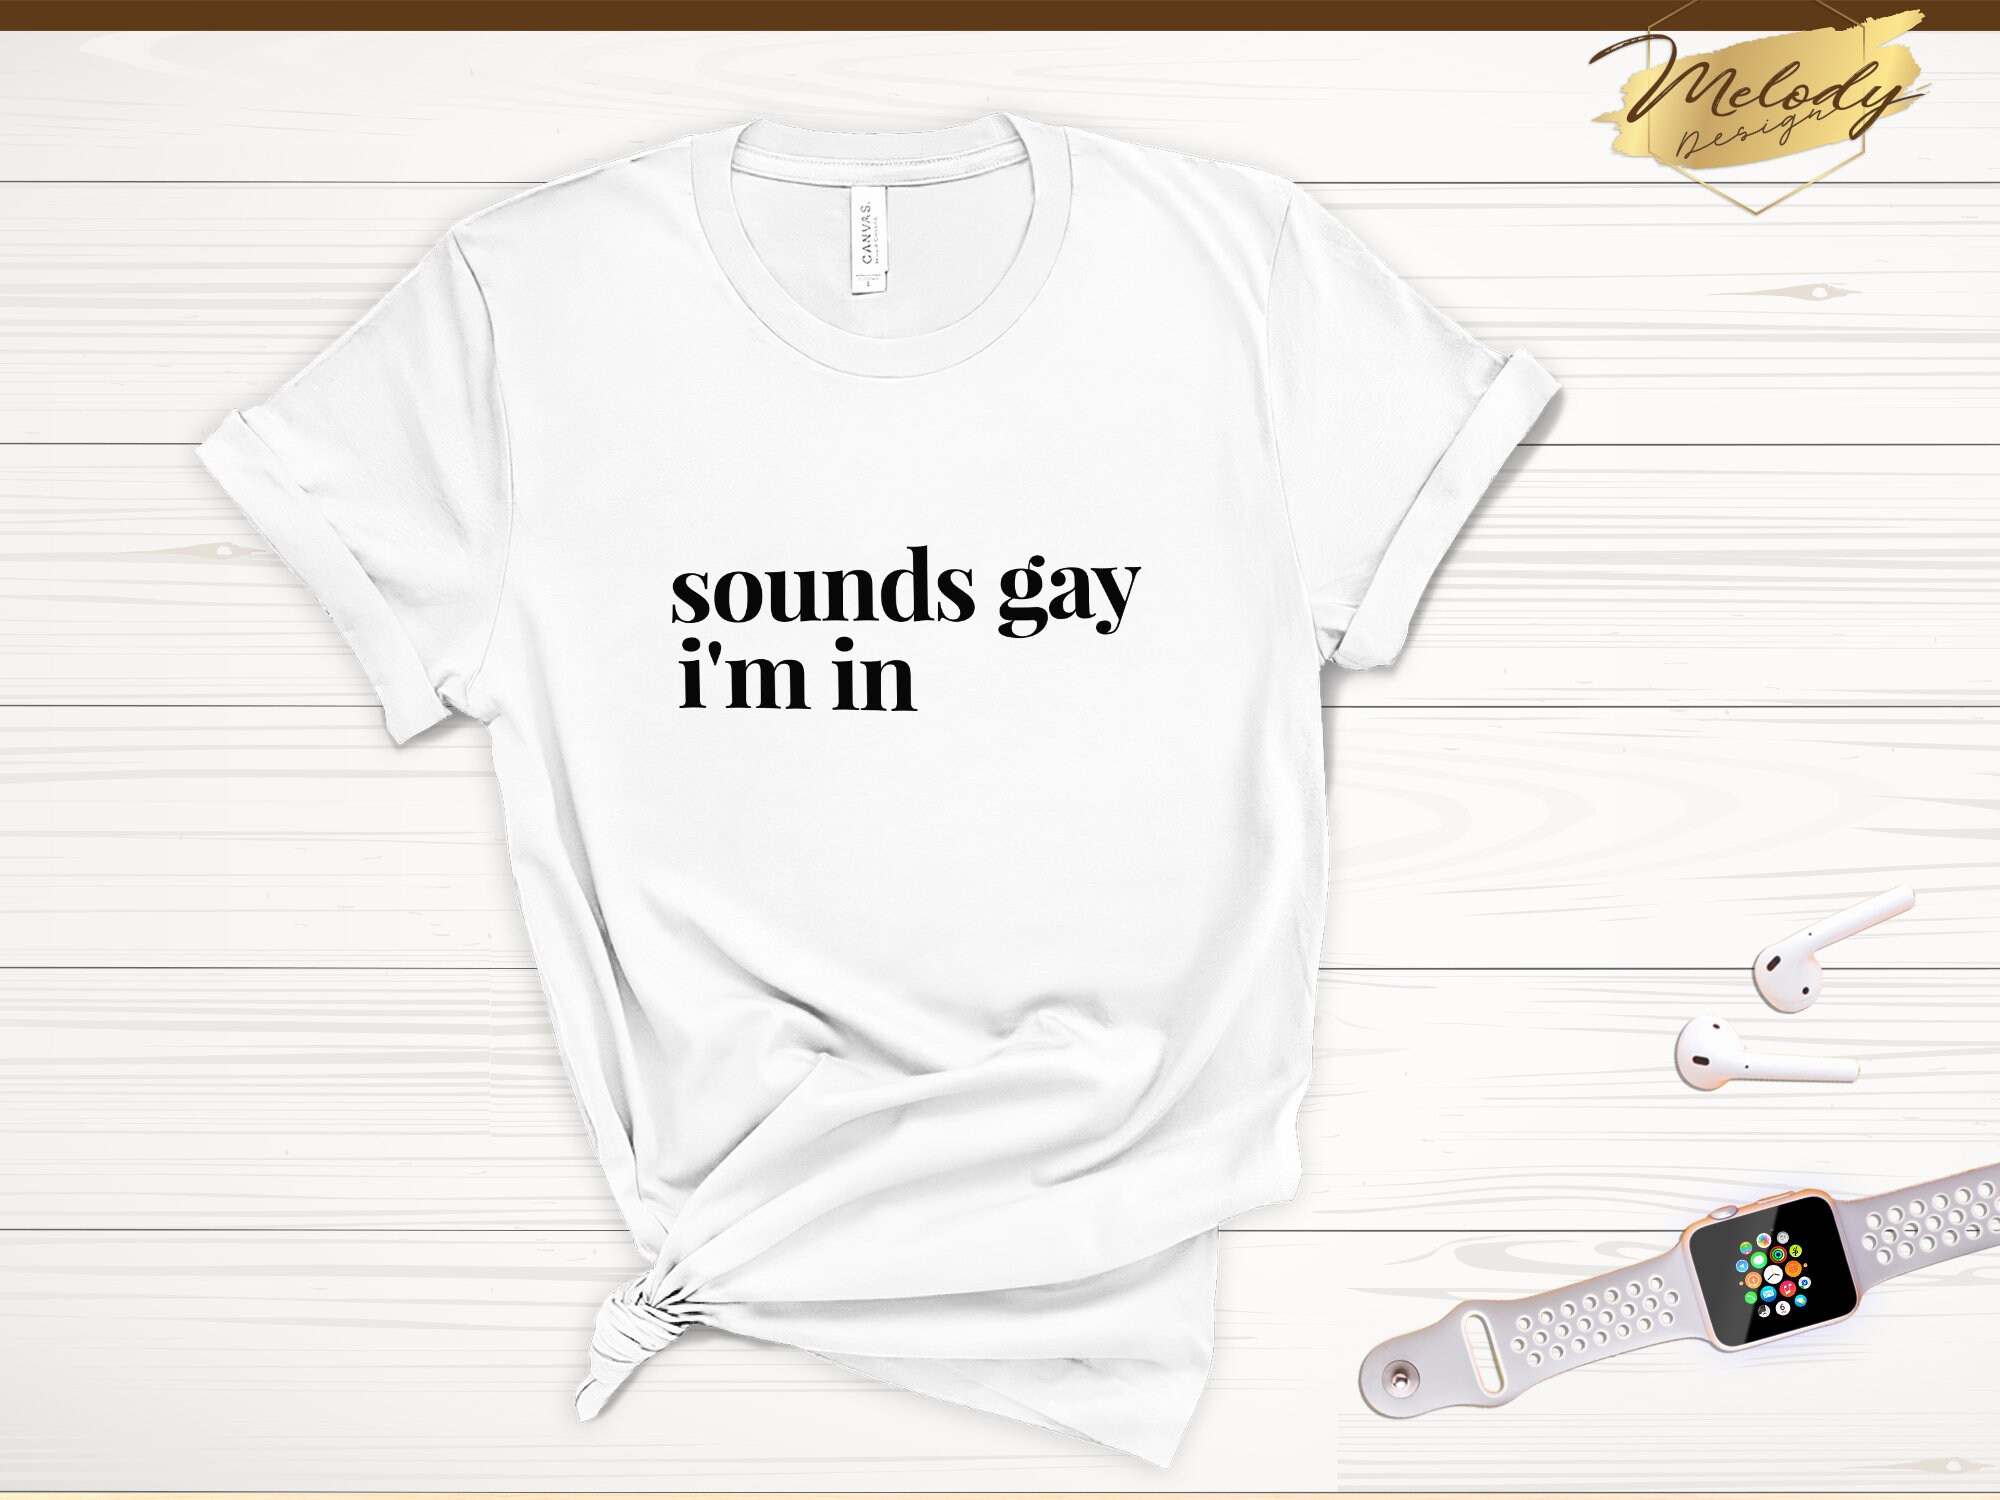 Discover Sounds Gay I'm In shirt, lgbt shirt, pride shirt, gay pride, lesbian shirt, gay shirt, transexual shirt, bisexual shirt, funny gay shirt